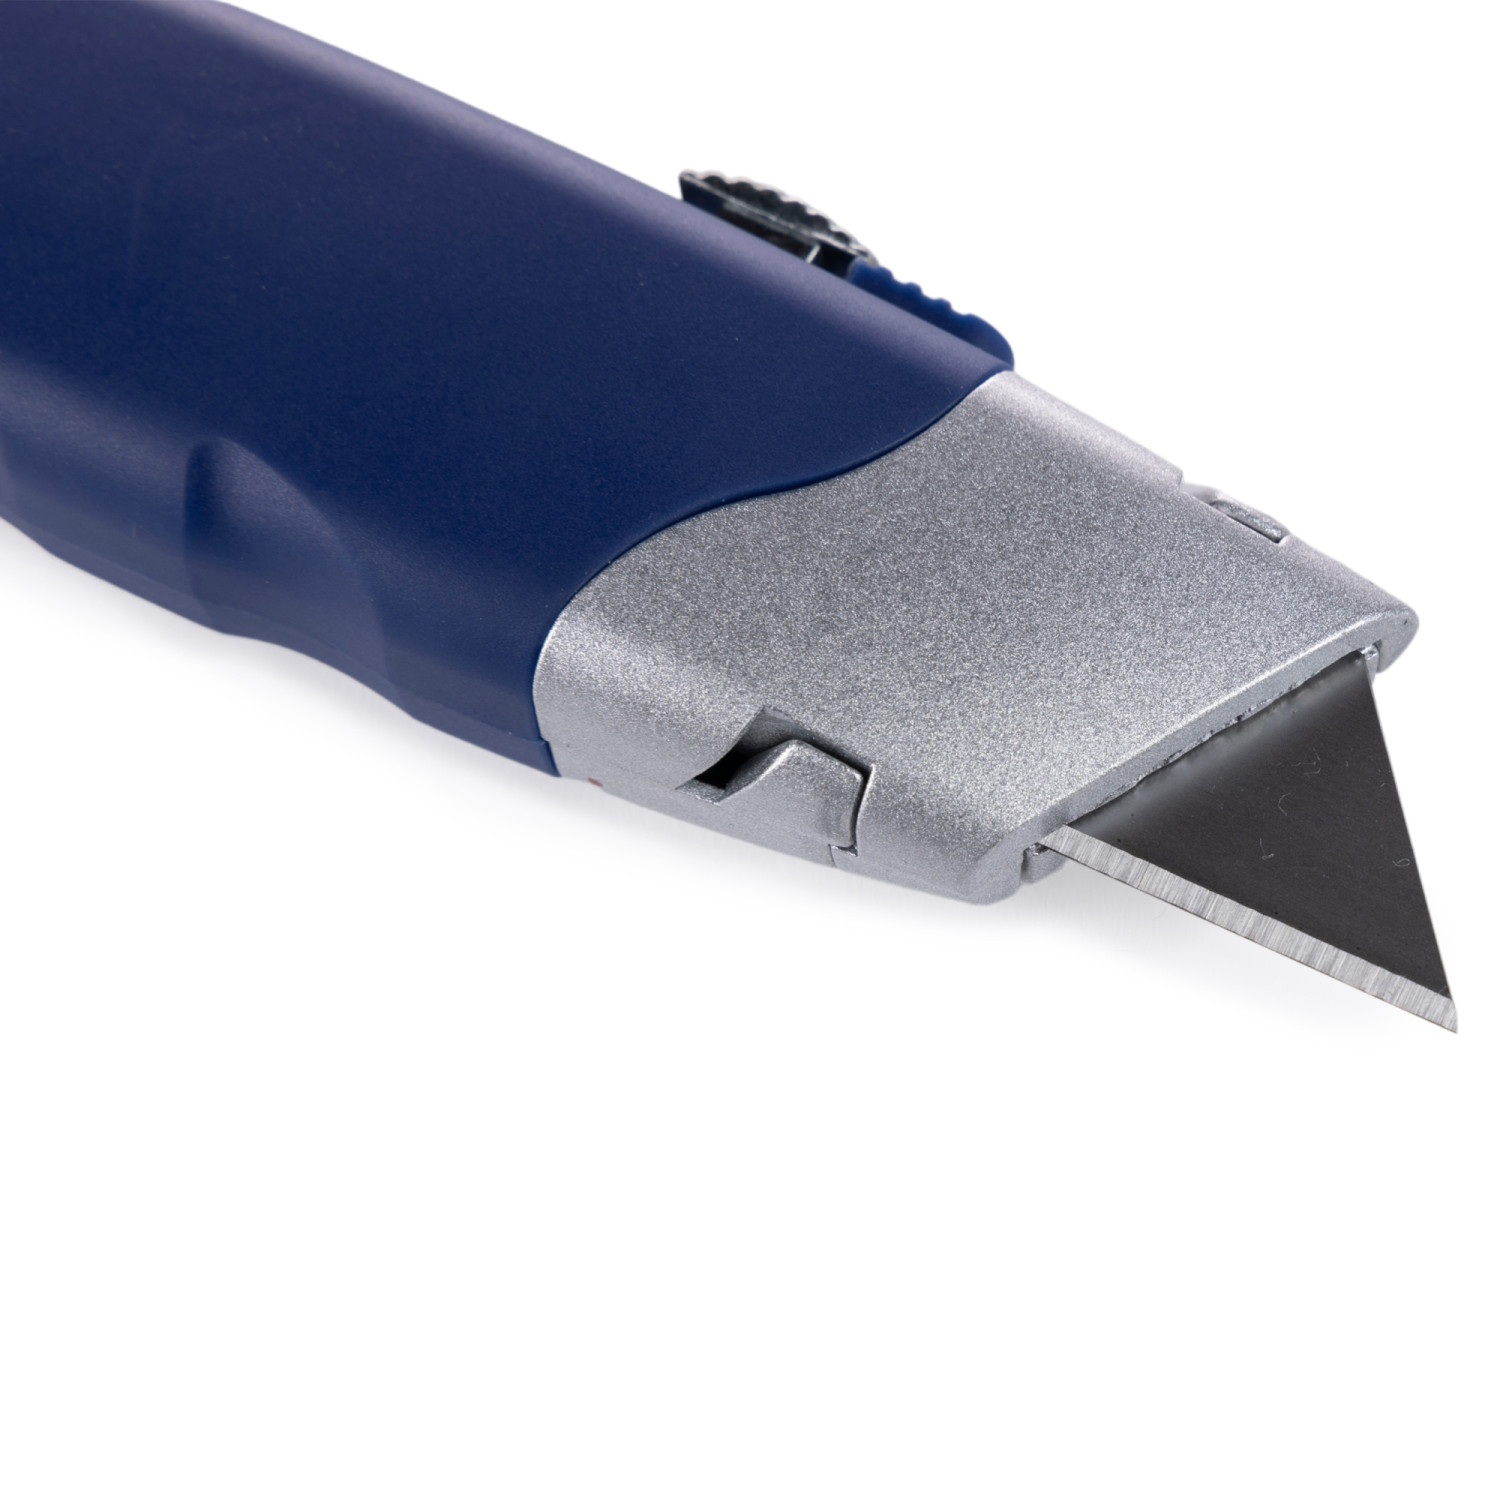 IDL-190 HD Retractable Box Cutter with Scoring Wheel buy in stock in U.S.  in IDL Packaging